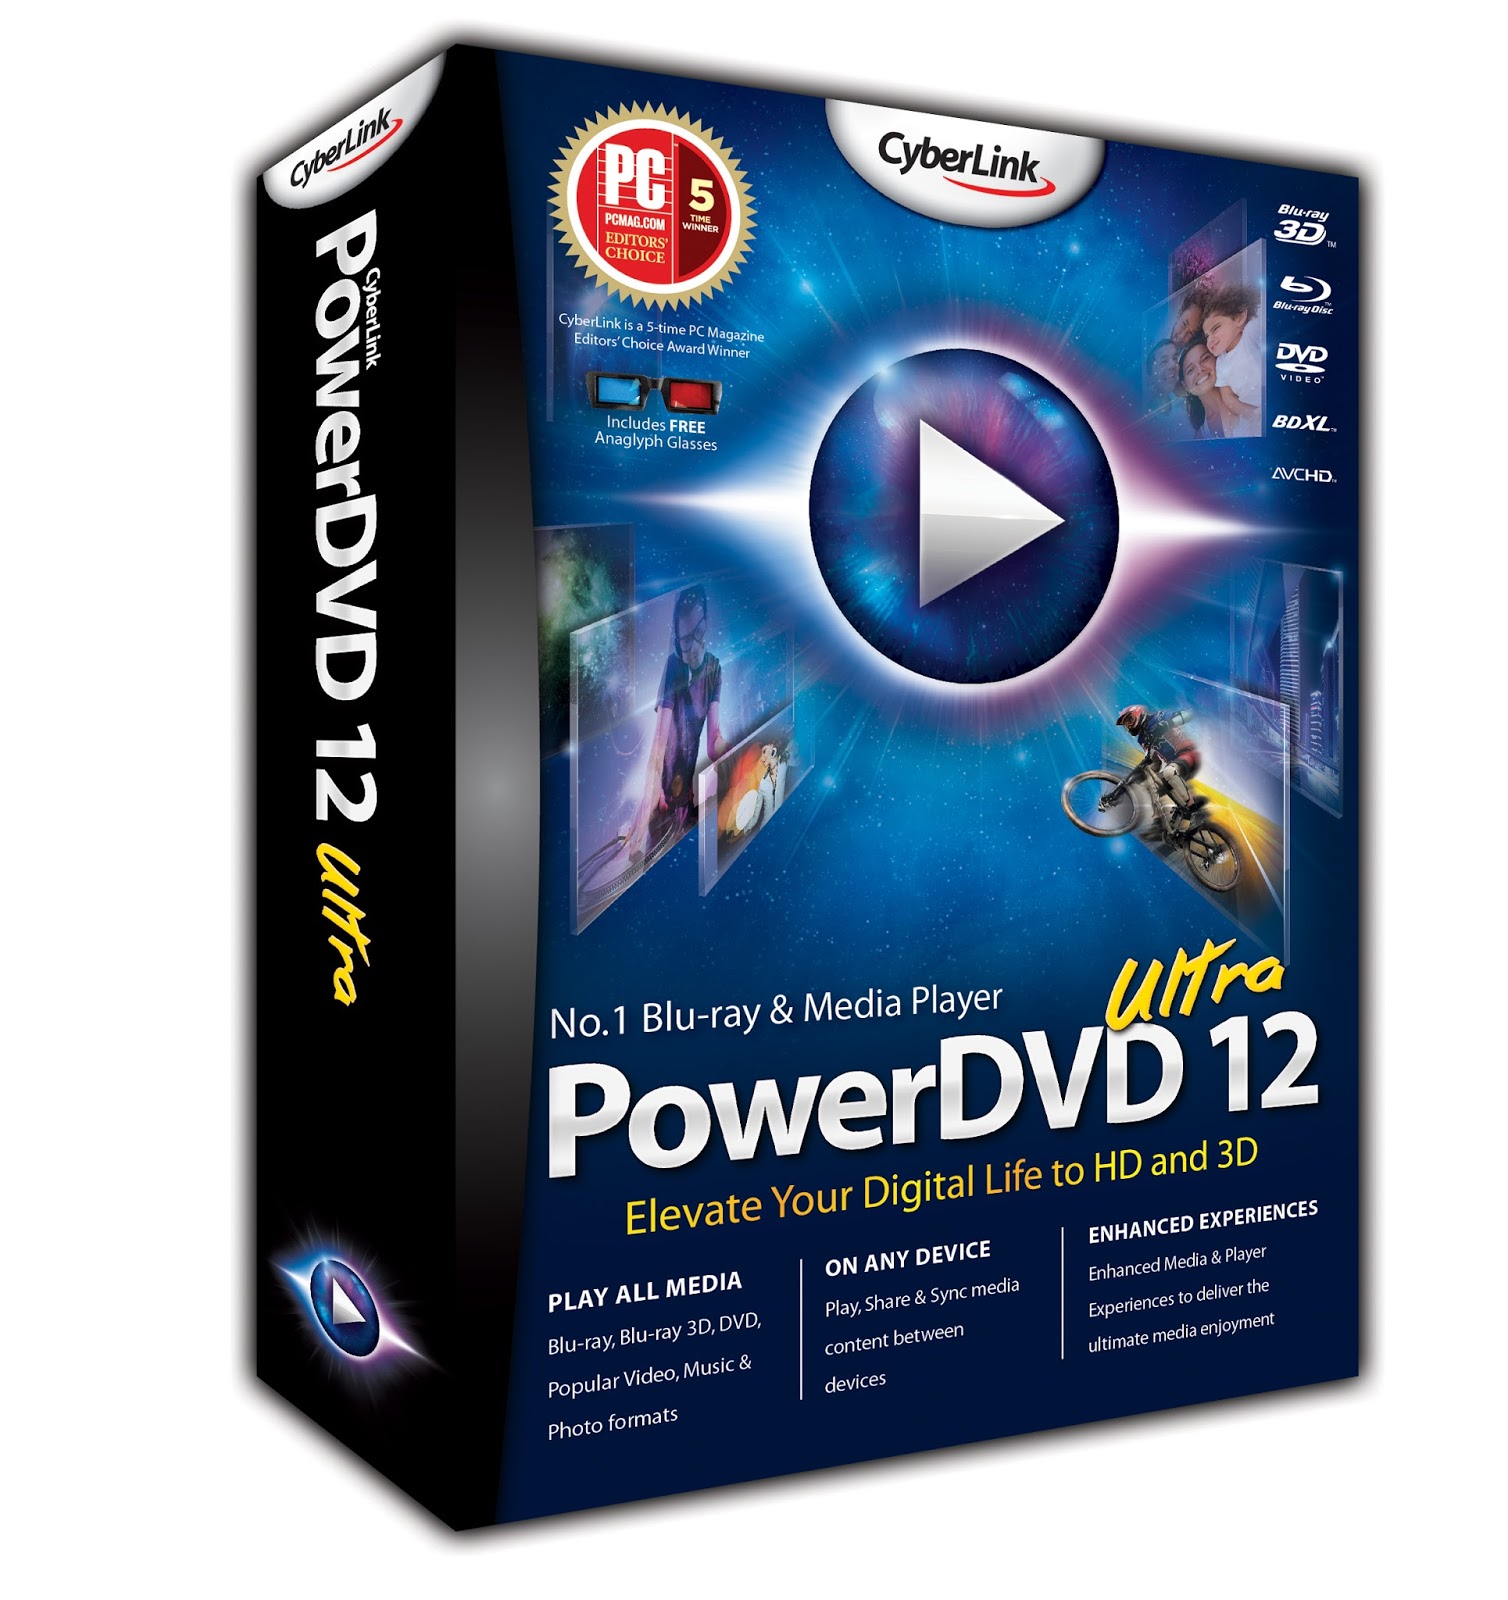 cyberlink powerdvd 18 ultra crack and serial key free download